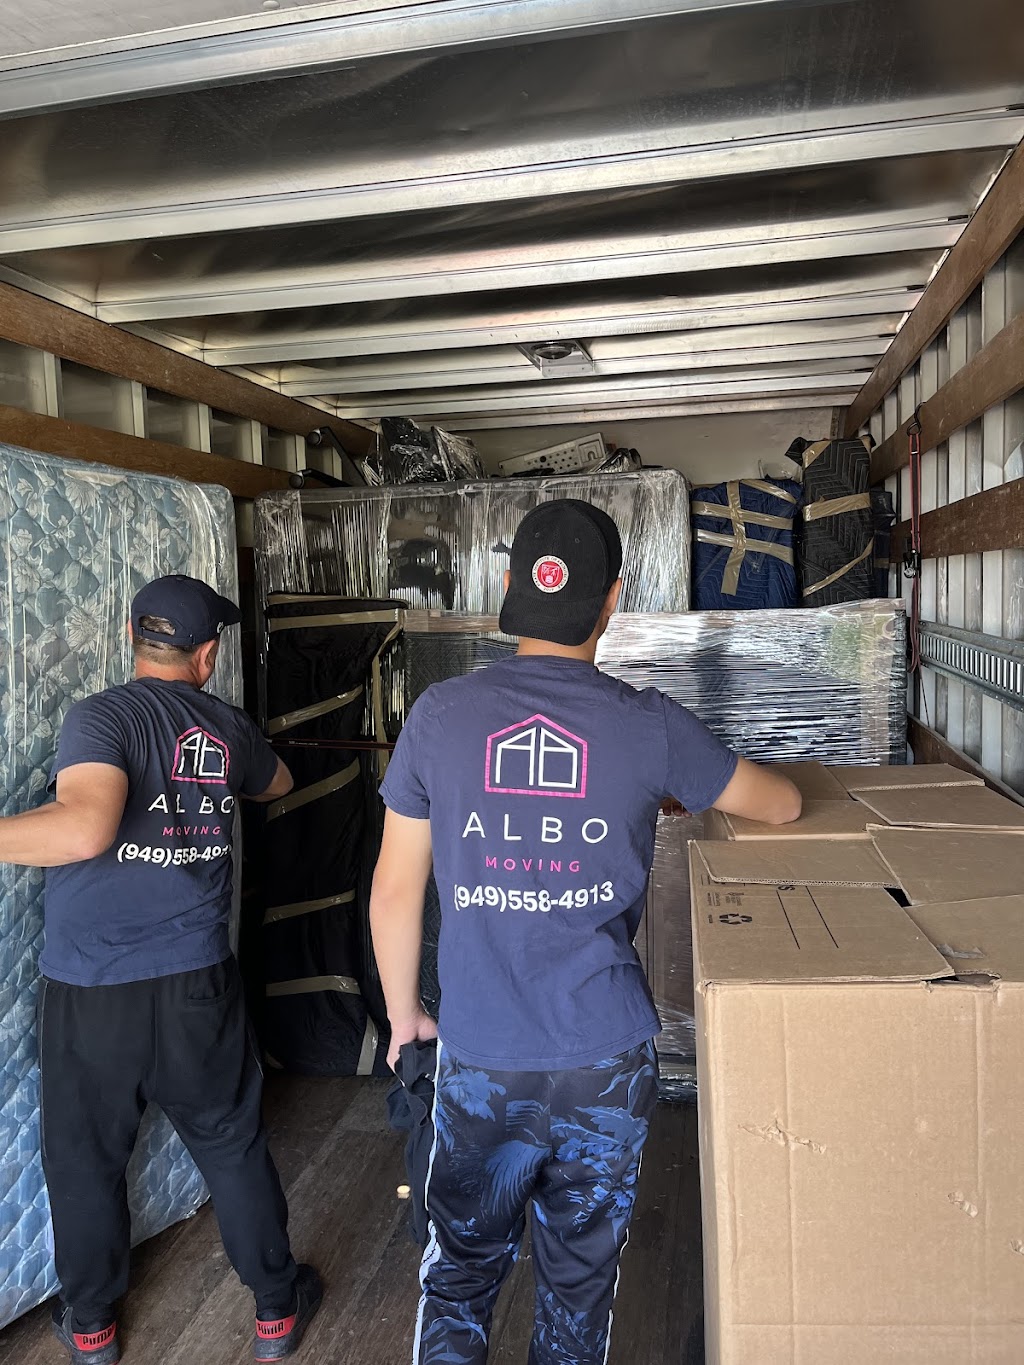 Albo moving & packing services | 252 Blue Ridge Dr, Levittown, PA 19057 | Phone: (949) 558-4913